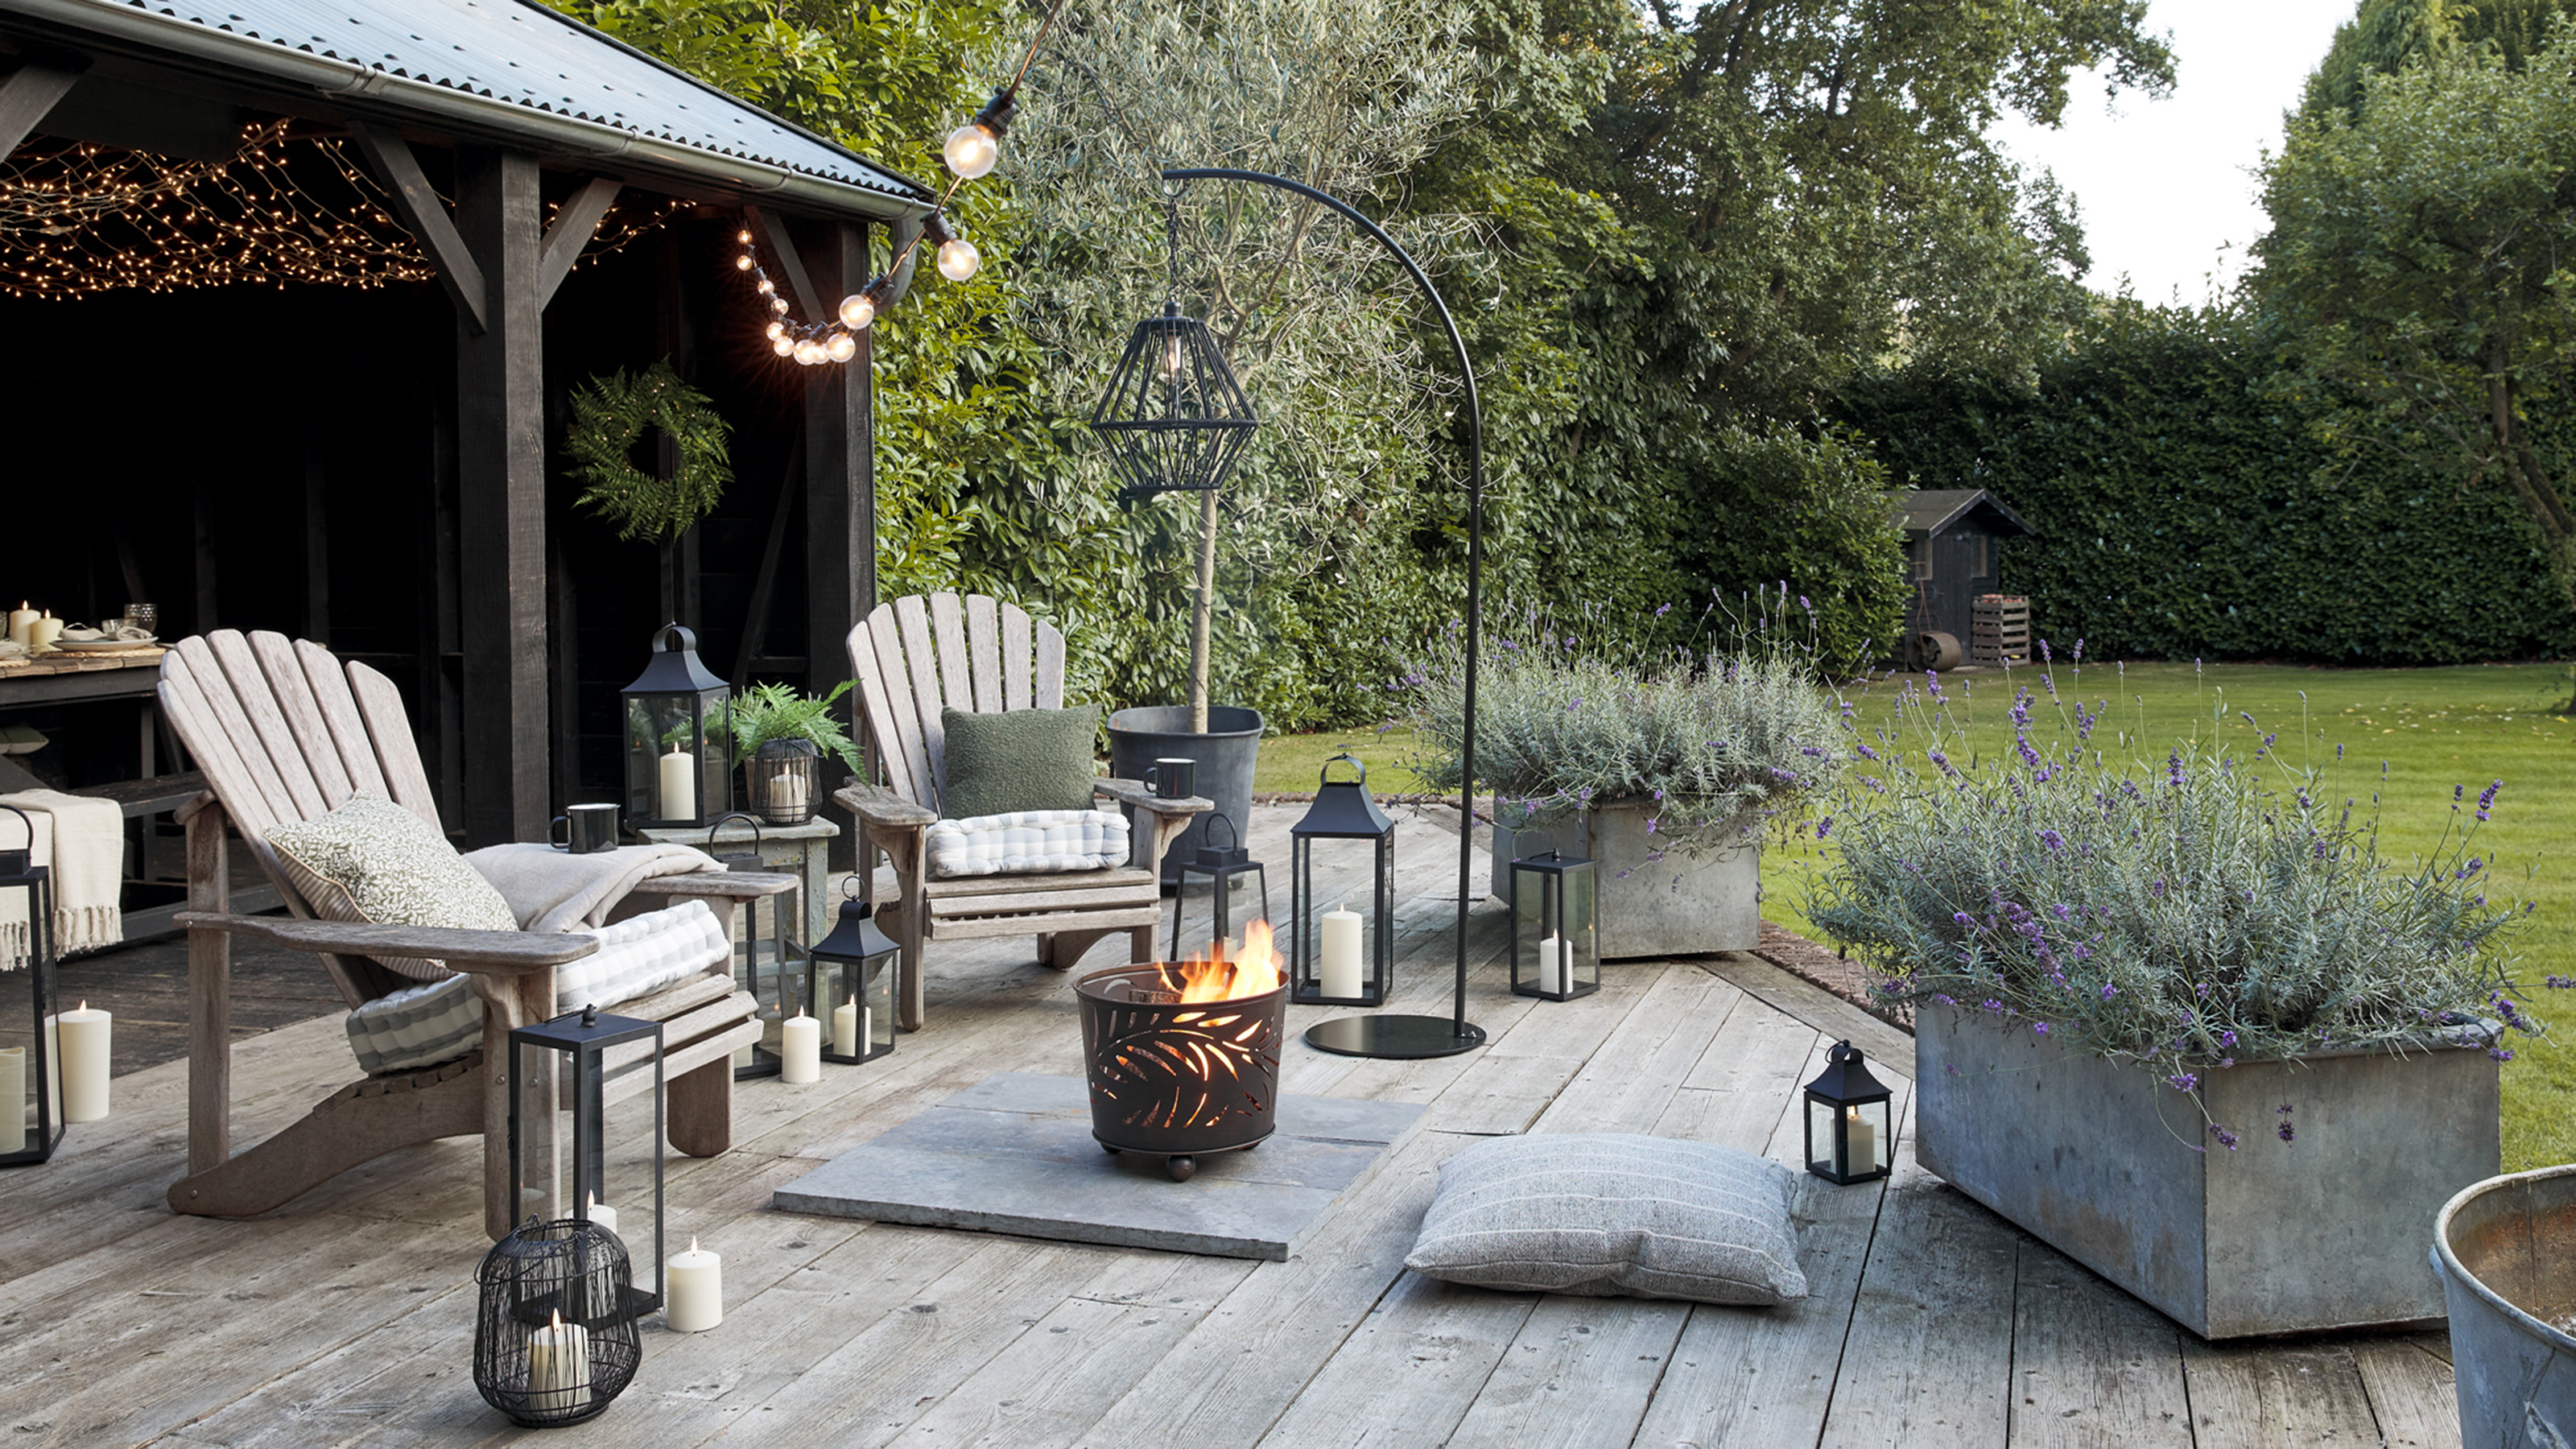 12 Of The Coolest Fire Pit Seating Ideas For Congregating | Real Homes